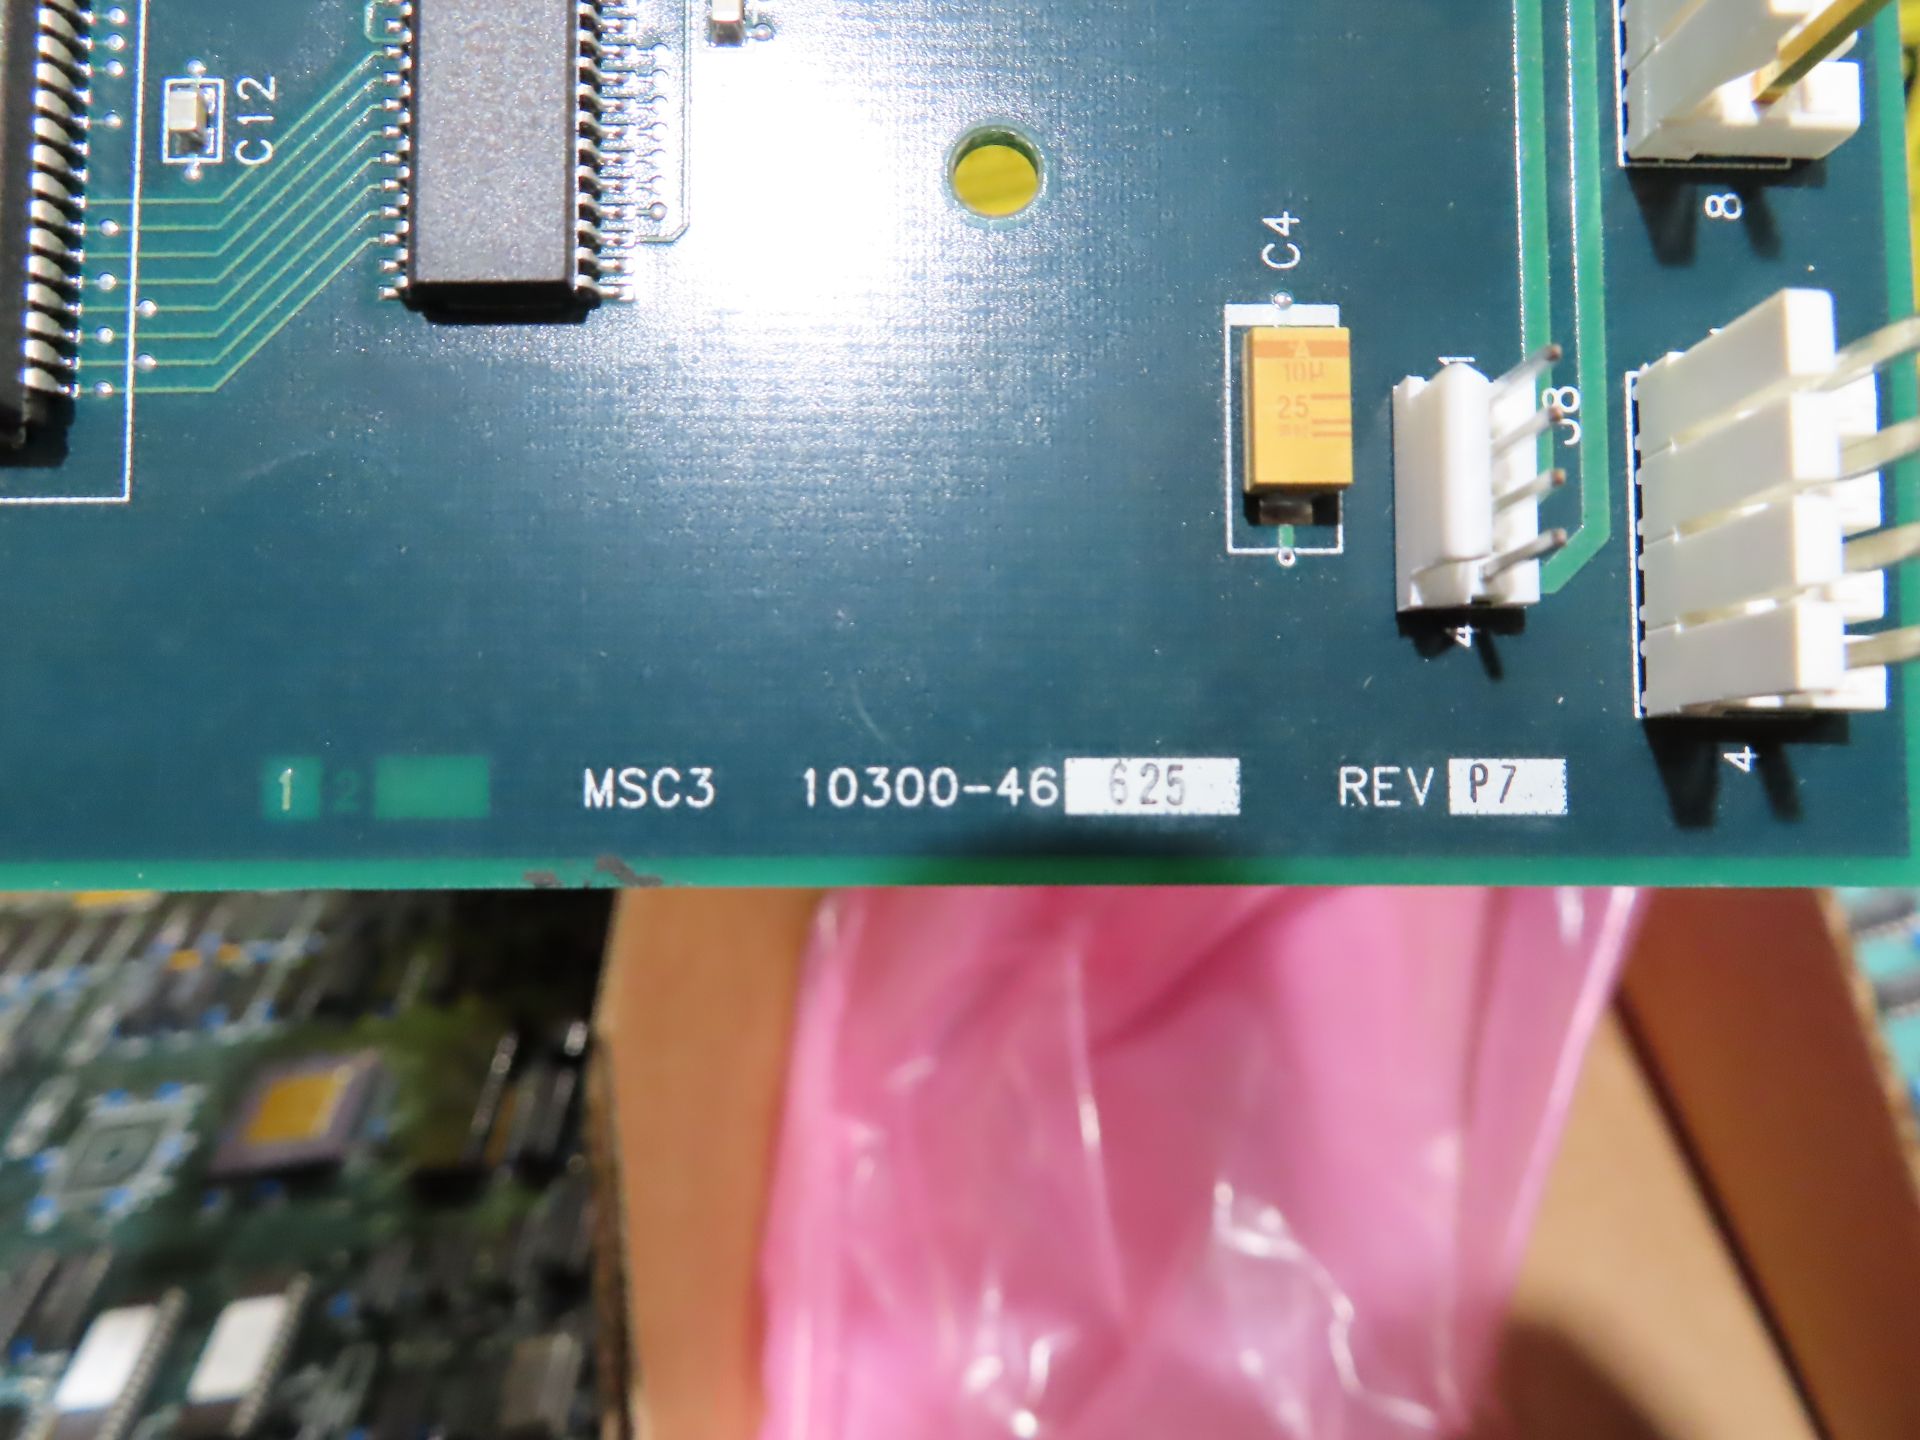 Adept part number 10300-46625 rev P7 mass storage control board, as always, with Brolyn LLC - Image 2 of 2